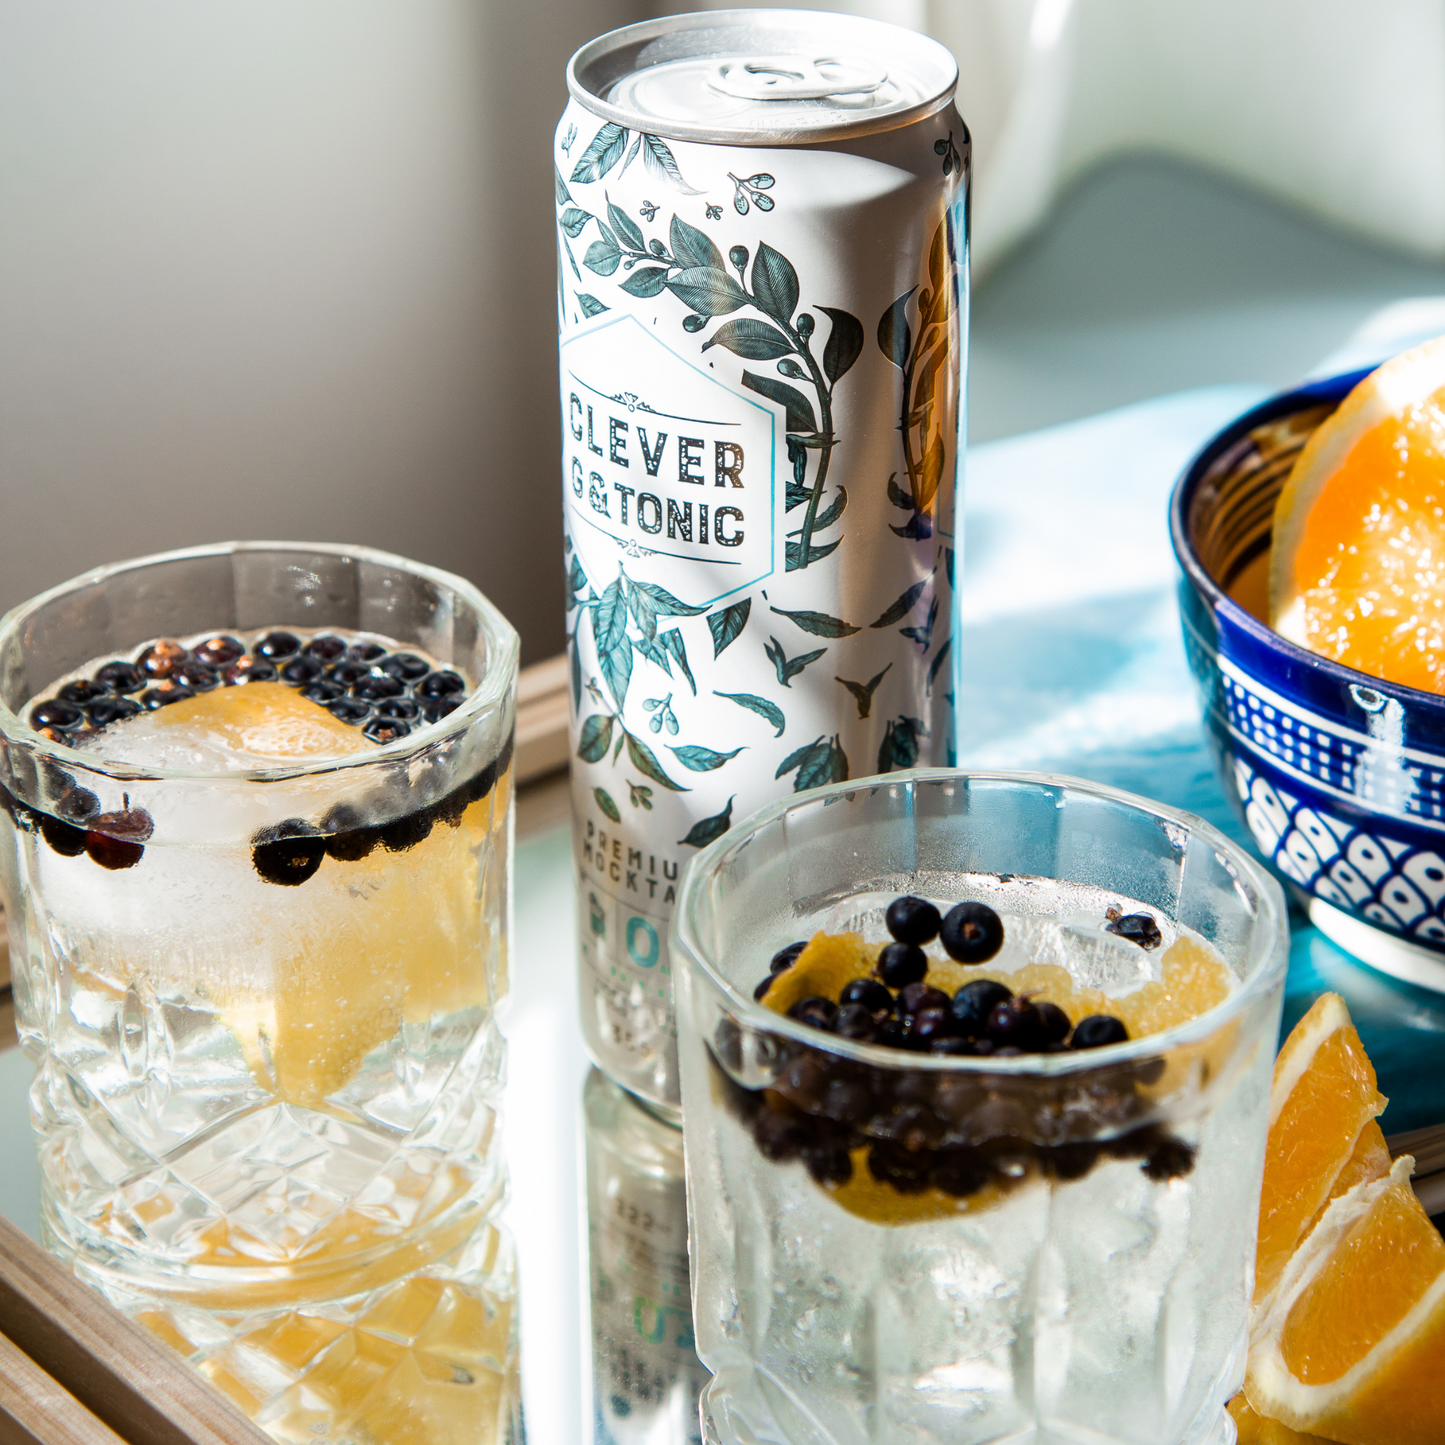 A photo of Clever G & Tonic poured in glasses. Knyota Drinks sells this alcohol alternative on its online store knyota.com.